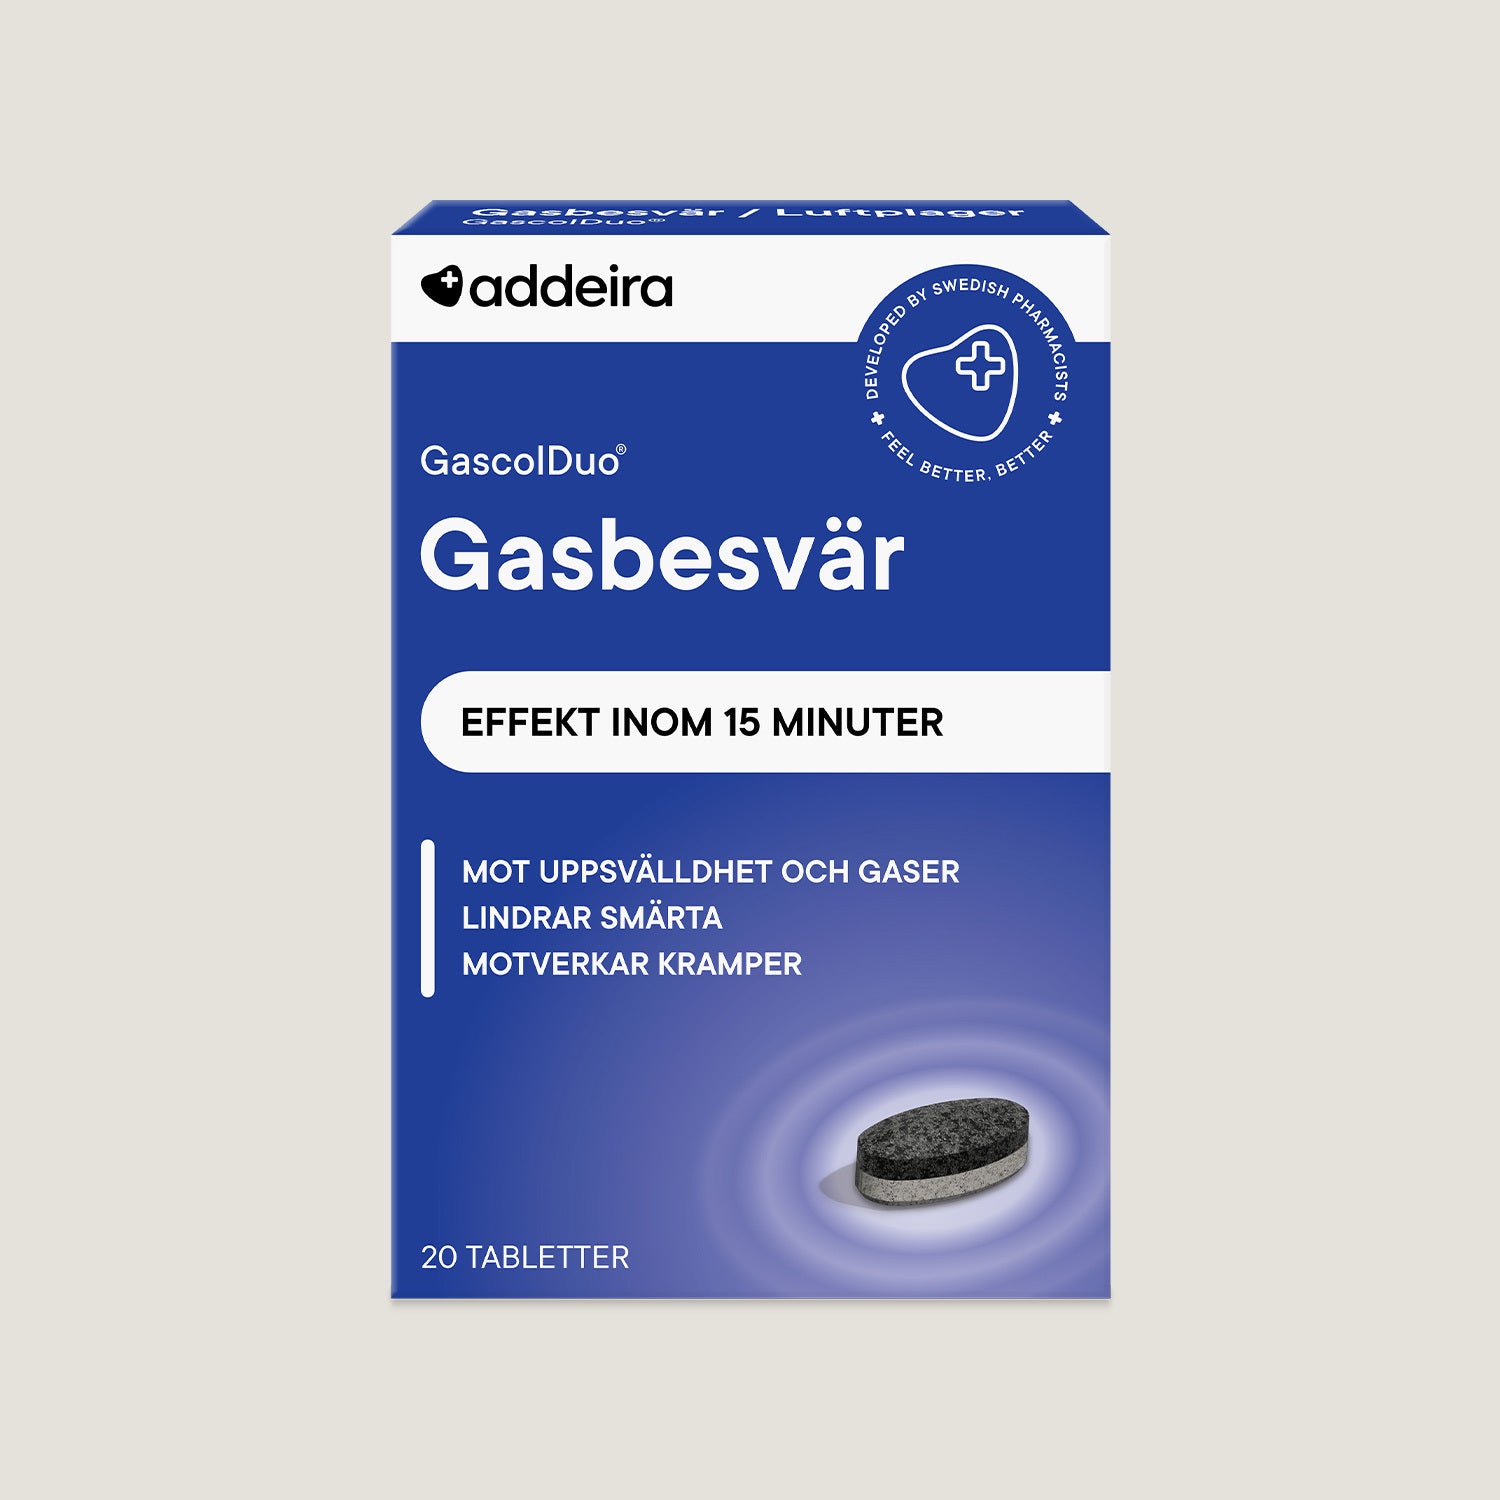 GascolDuo for gas problems, 20 tablets